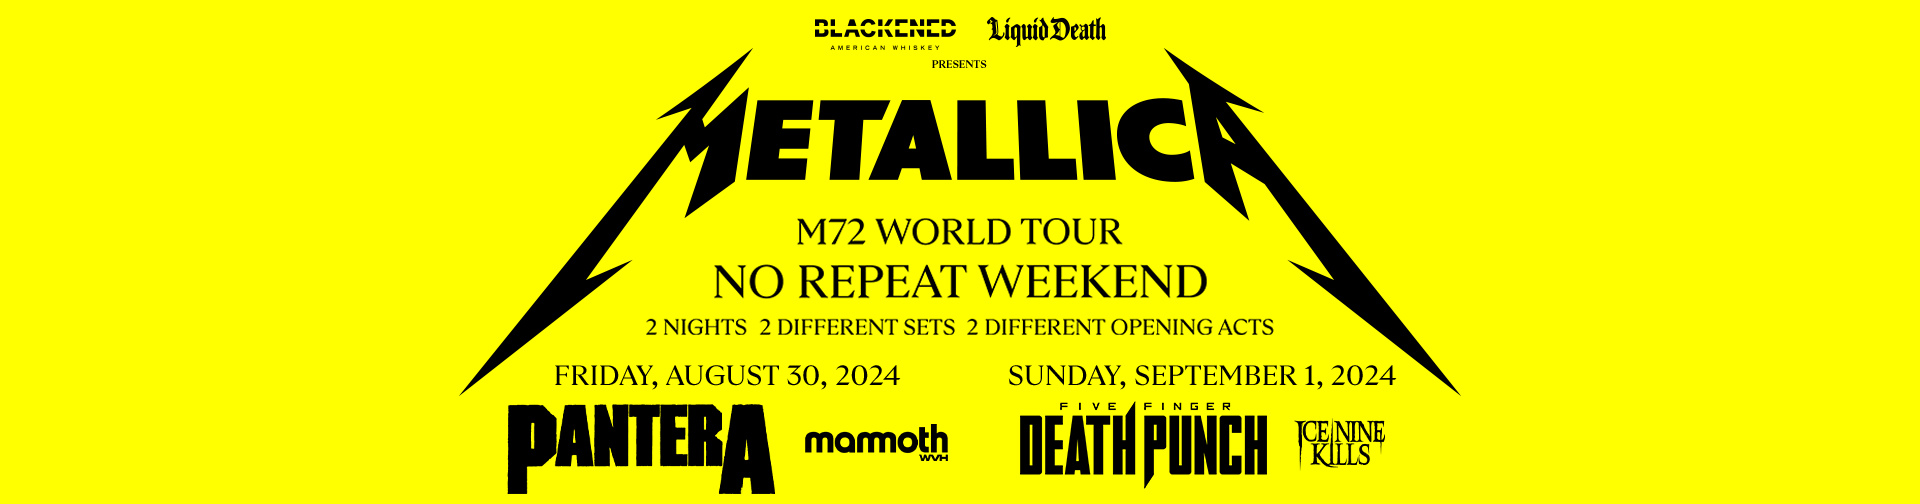 Metallica at Lumen Field in Seattle, WA, United States on September 1, 2024 on the M72 World